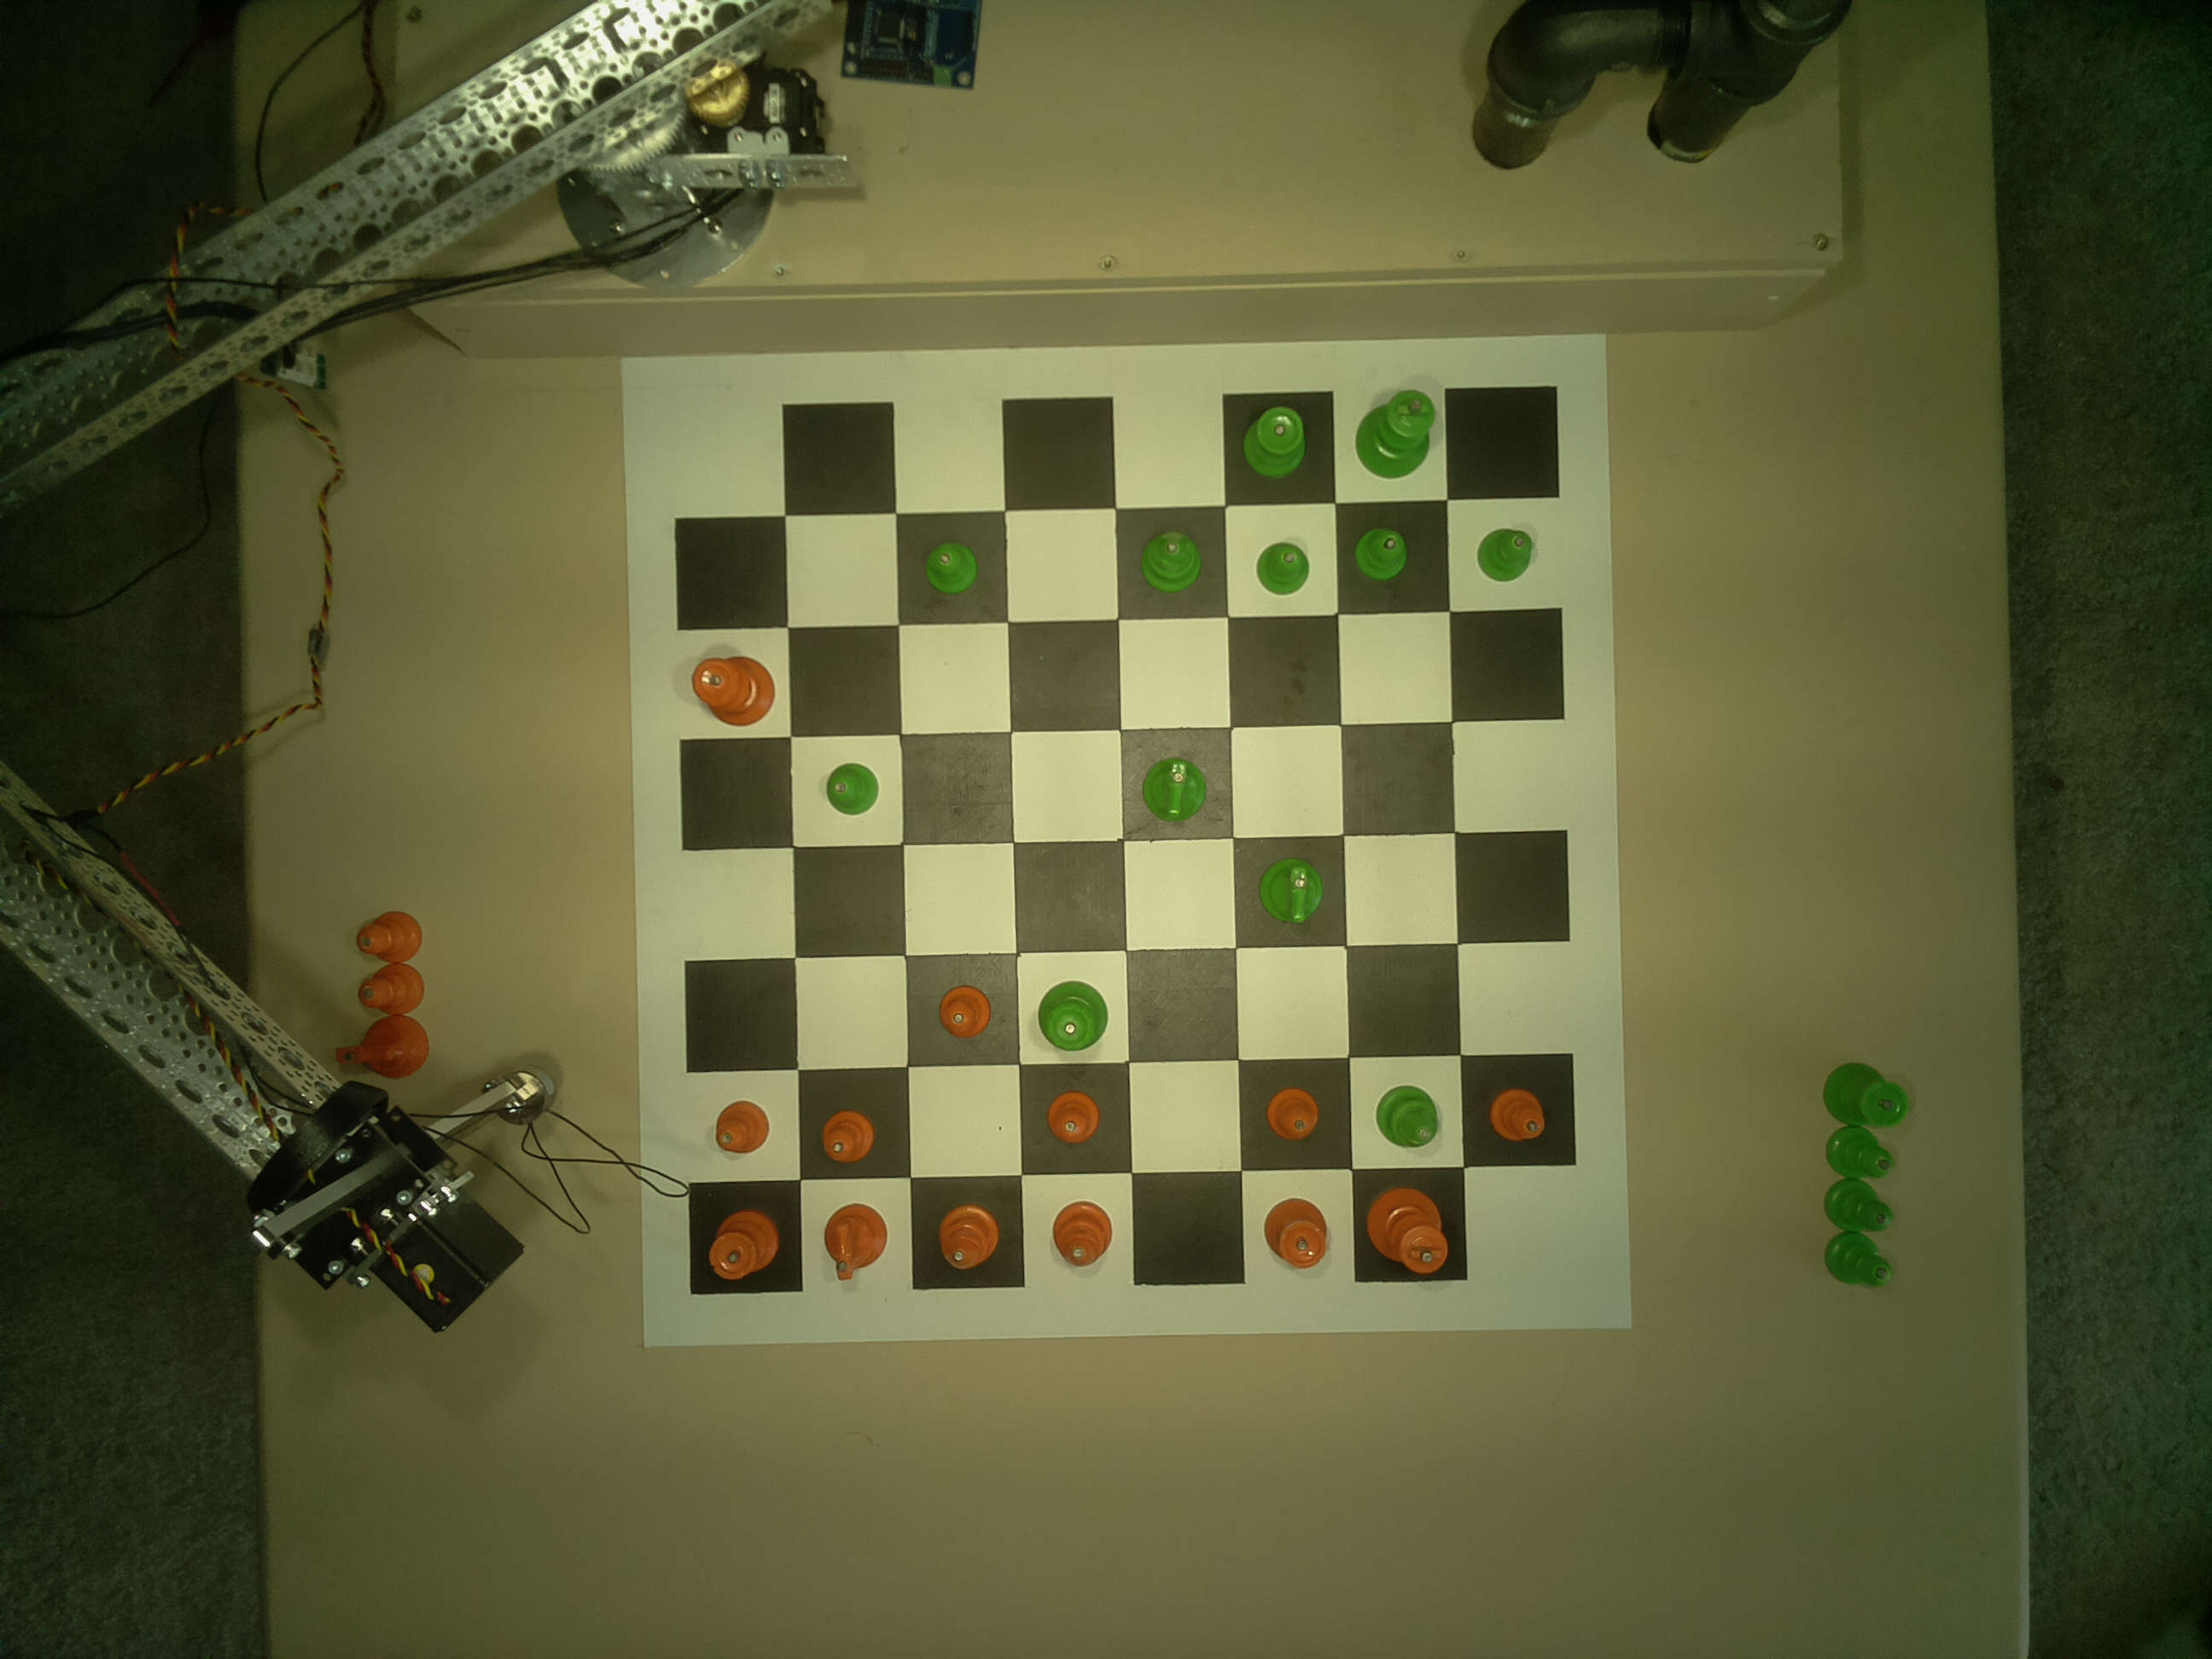 A raw image of the chessboard on table, captured from the camera.